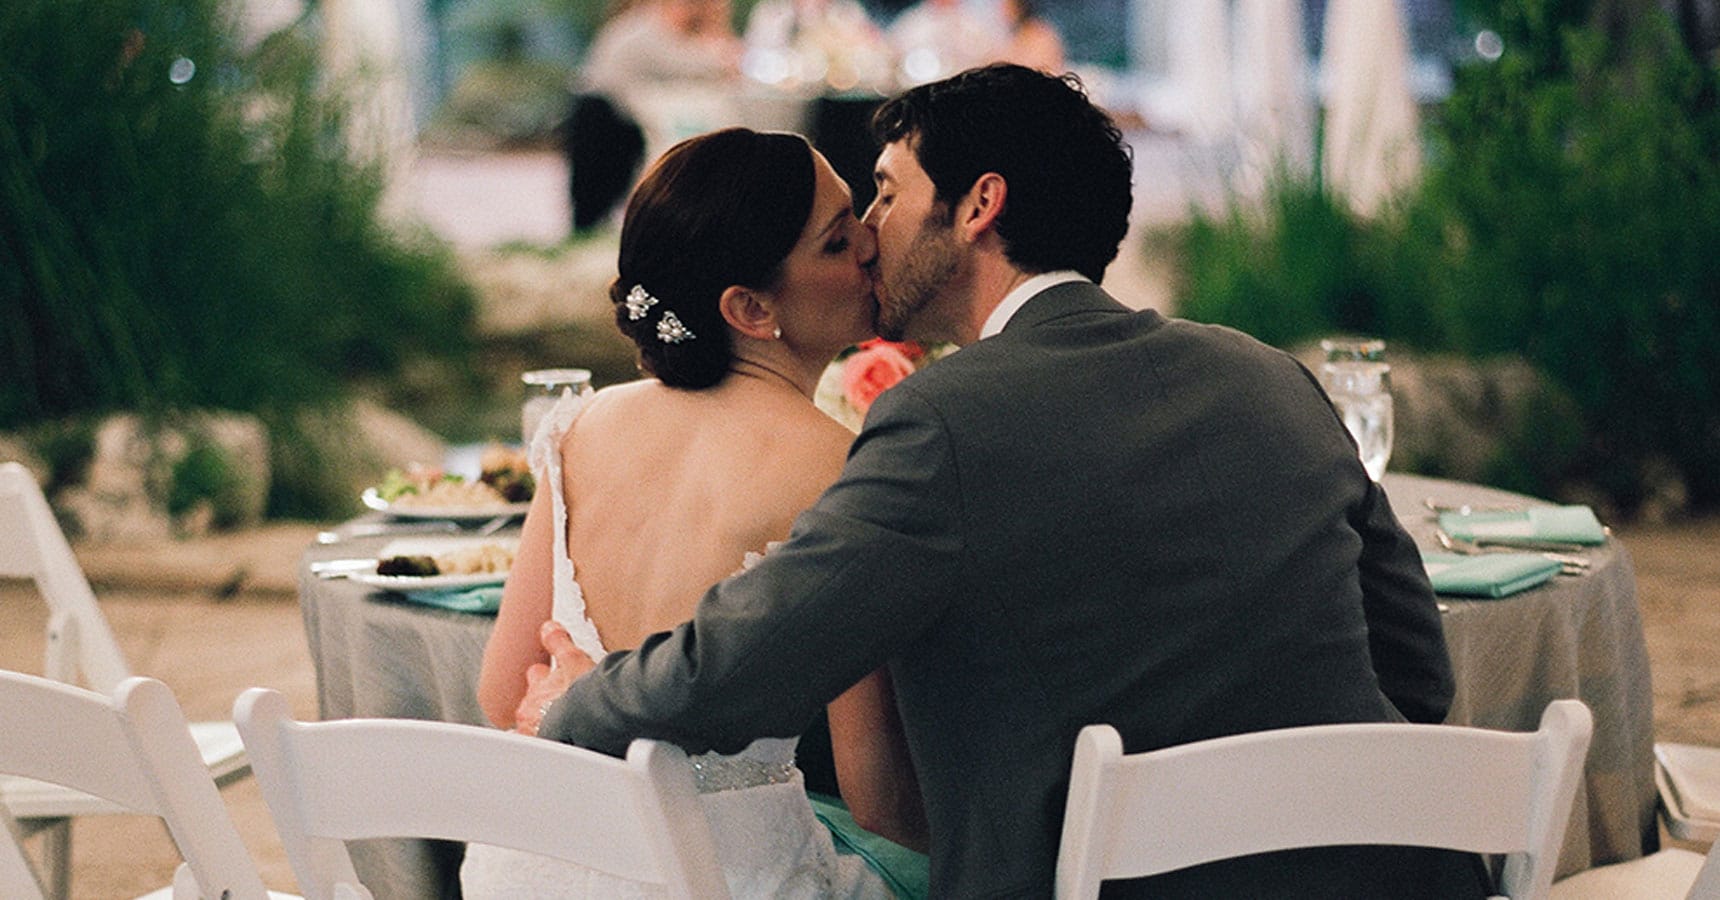 Bride and Groom kissing